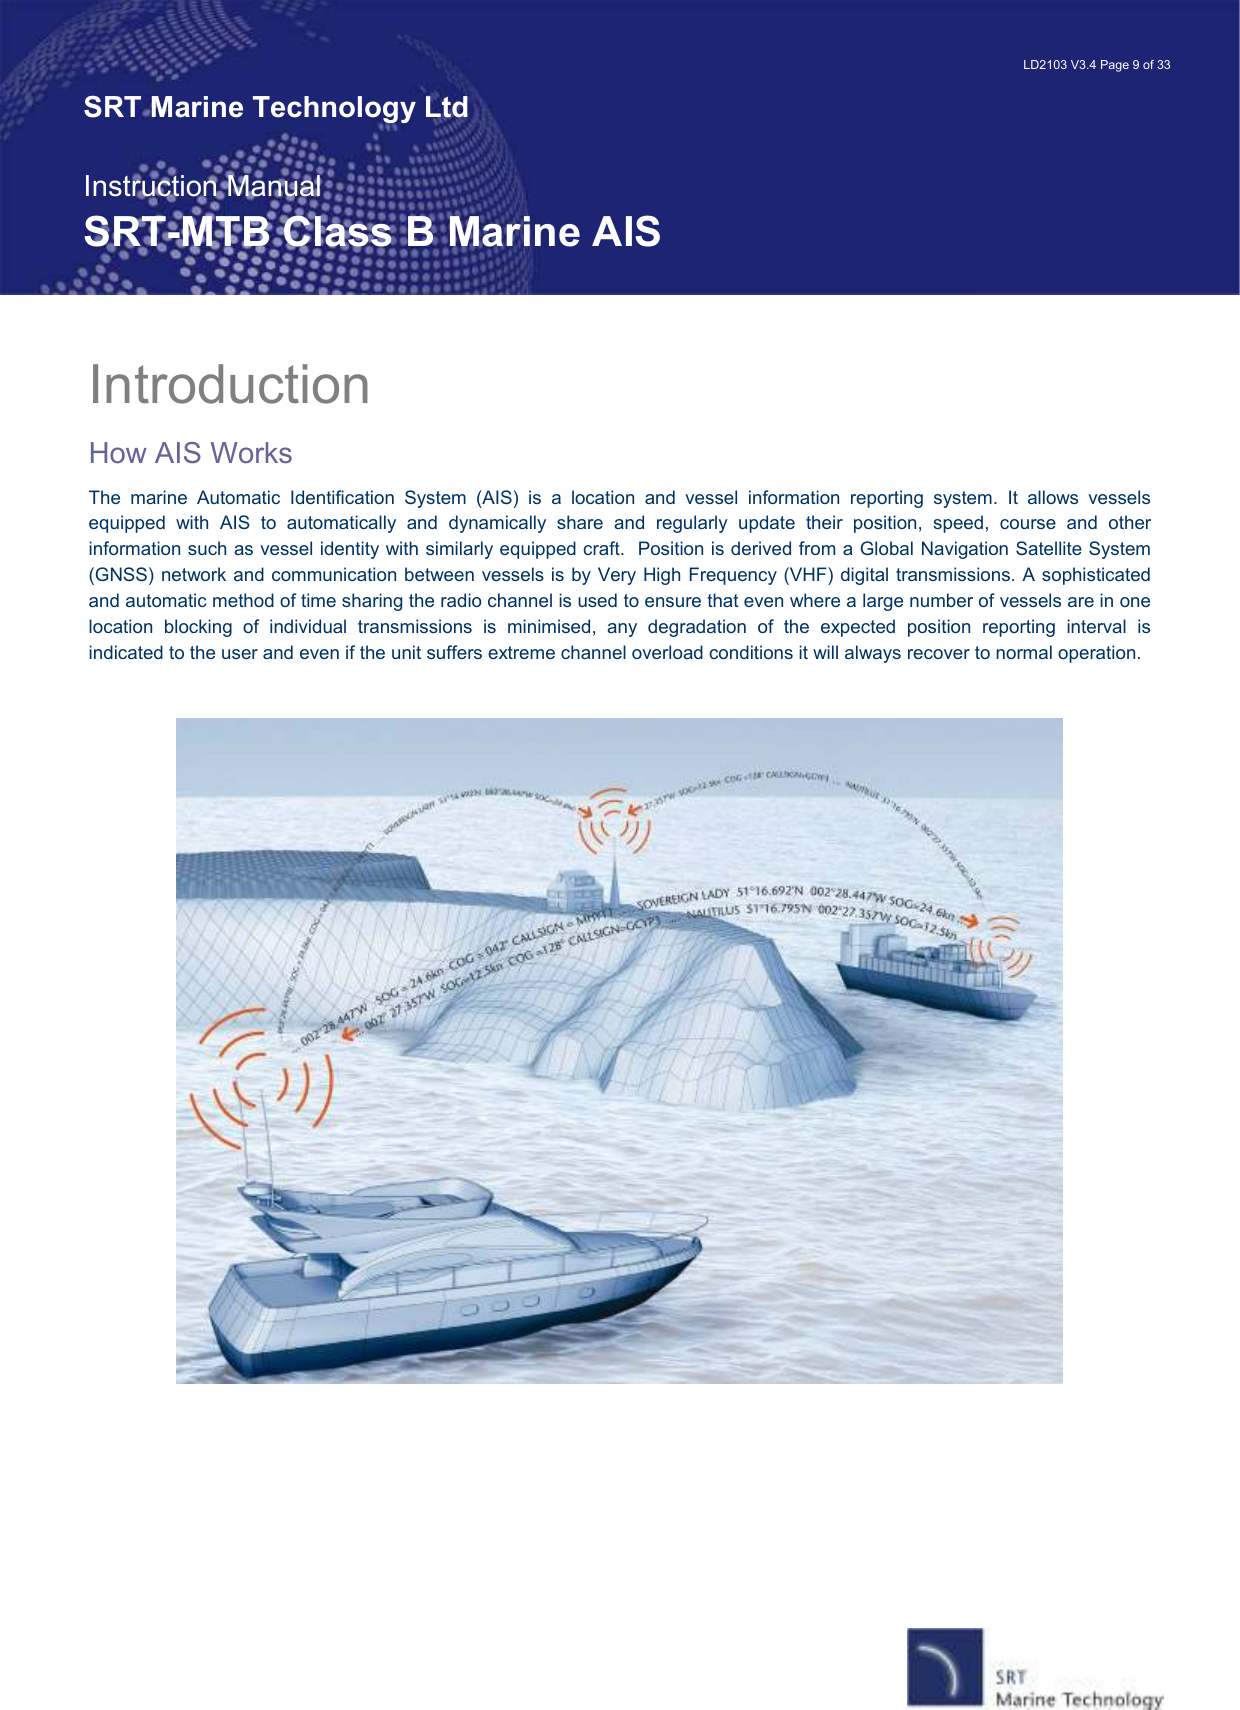   LD2103 V3.4 Page 9 of 33 SRT Marine Technology Ltd  Instruction Manual SRT-MTB Class B Marine AIS Introduction How AIS Works The  marine  Automatic  Identification  System  (AIS)  is  a  location  and  vessel  information  reporting  system.  It  allows  vessels equipped  with  AIS  to  automatically  and  dynamically  share  and  regularly  update  their  position,  speed,  course  and  other information such as vessel identity with similarly equipped craft.  Position is derived from a Global Navigation Satellite System (GNSS) network and communication between vessels is by Very High Frequency (VHF) digital transmissions. A sophisticated and automatic method of time sharing the radio channel is used to ensure that even where a large number of vessels are in one location  blocking  of  individual  transmissions  is  minimised,  any  degradation  of  the  expected  position  reporting  interval  is indicated to the user and even if the unit suffers extreme channel overload conditions it will always recover to normal operation.       